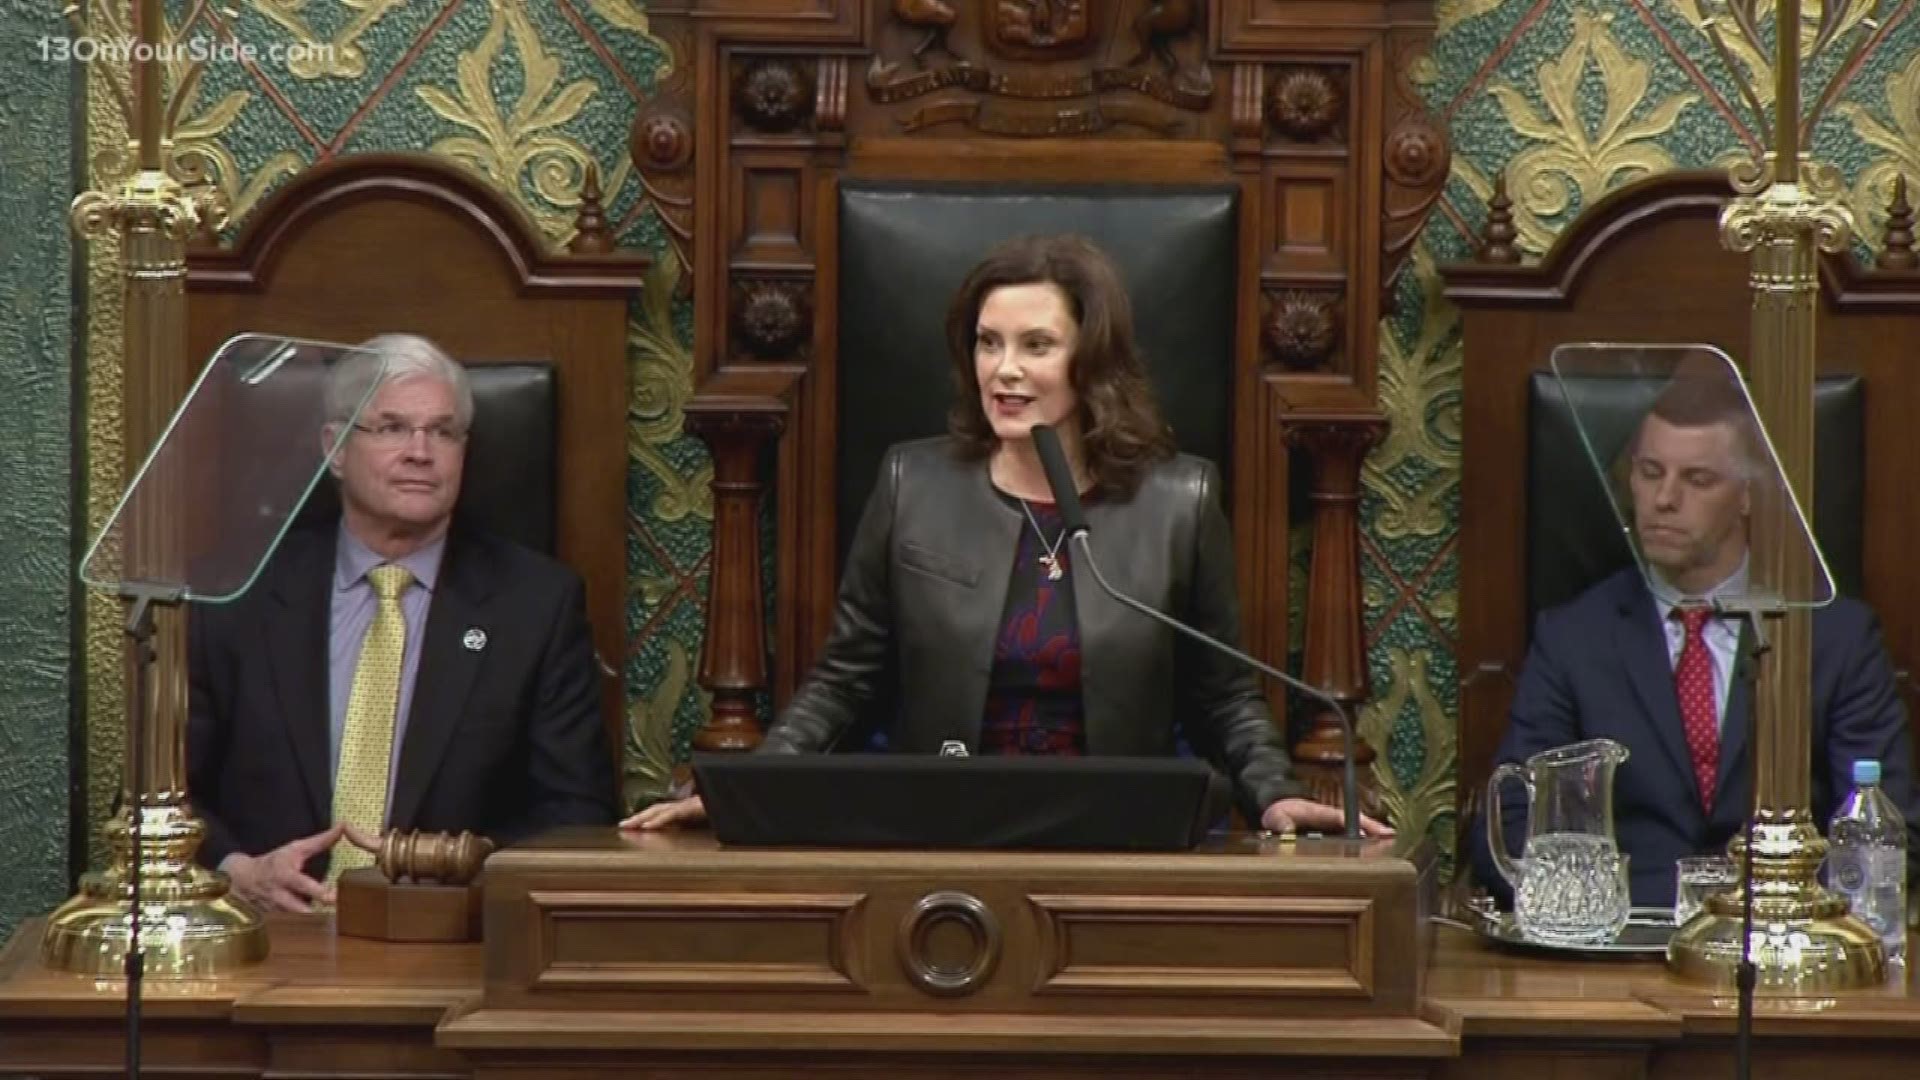 Whitmer says Michigan will borrow $3.5 billion to rebuild state highways and bridges over five years.